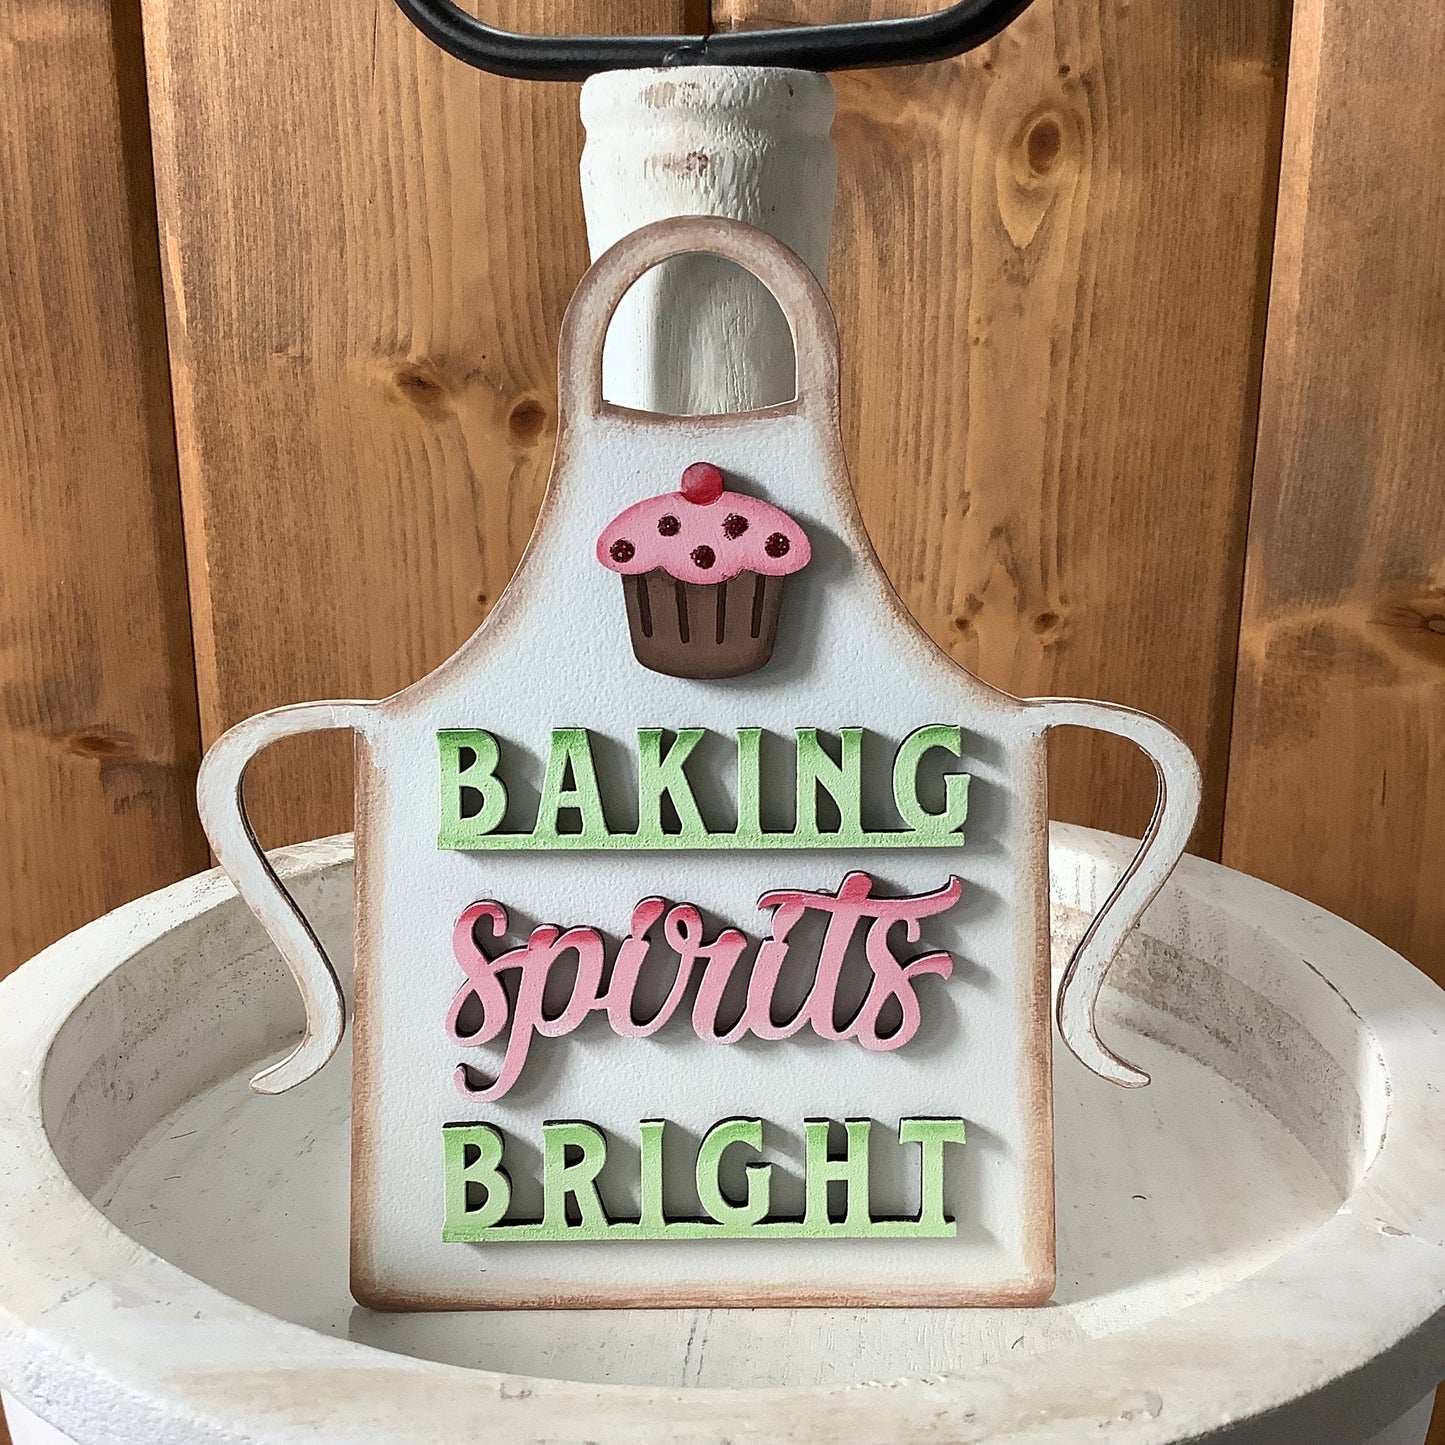 5 Piece Baking Spirits Bright Gingerbread Tier Tray Set, Adorable Hand Painted Wood Holiday, Christmas Display